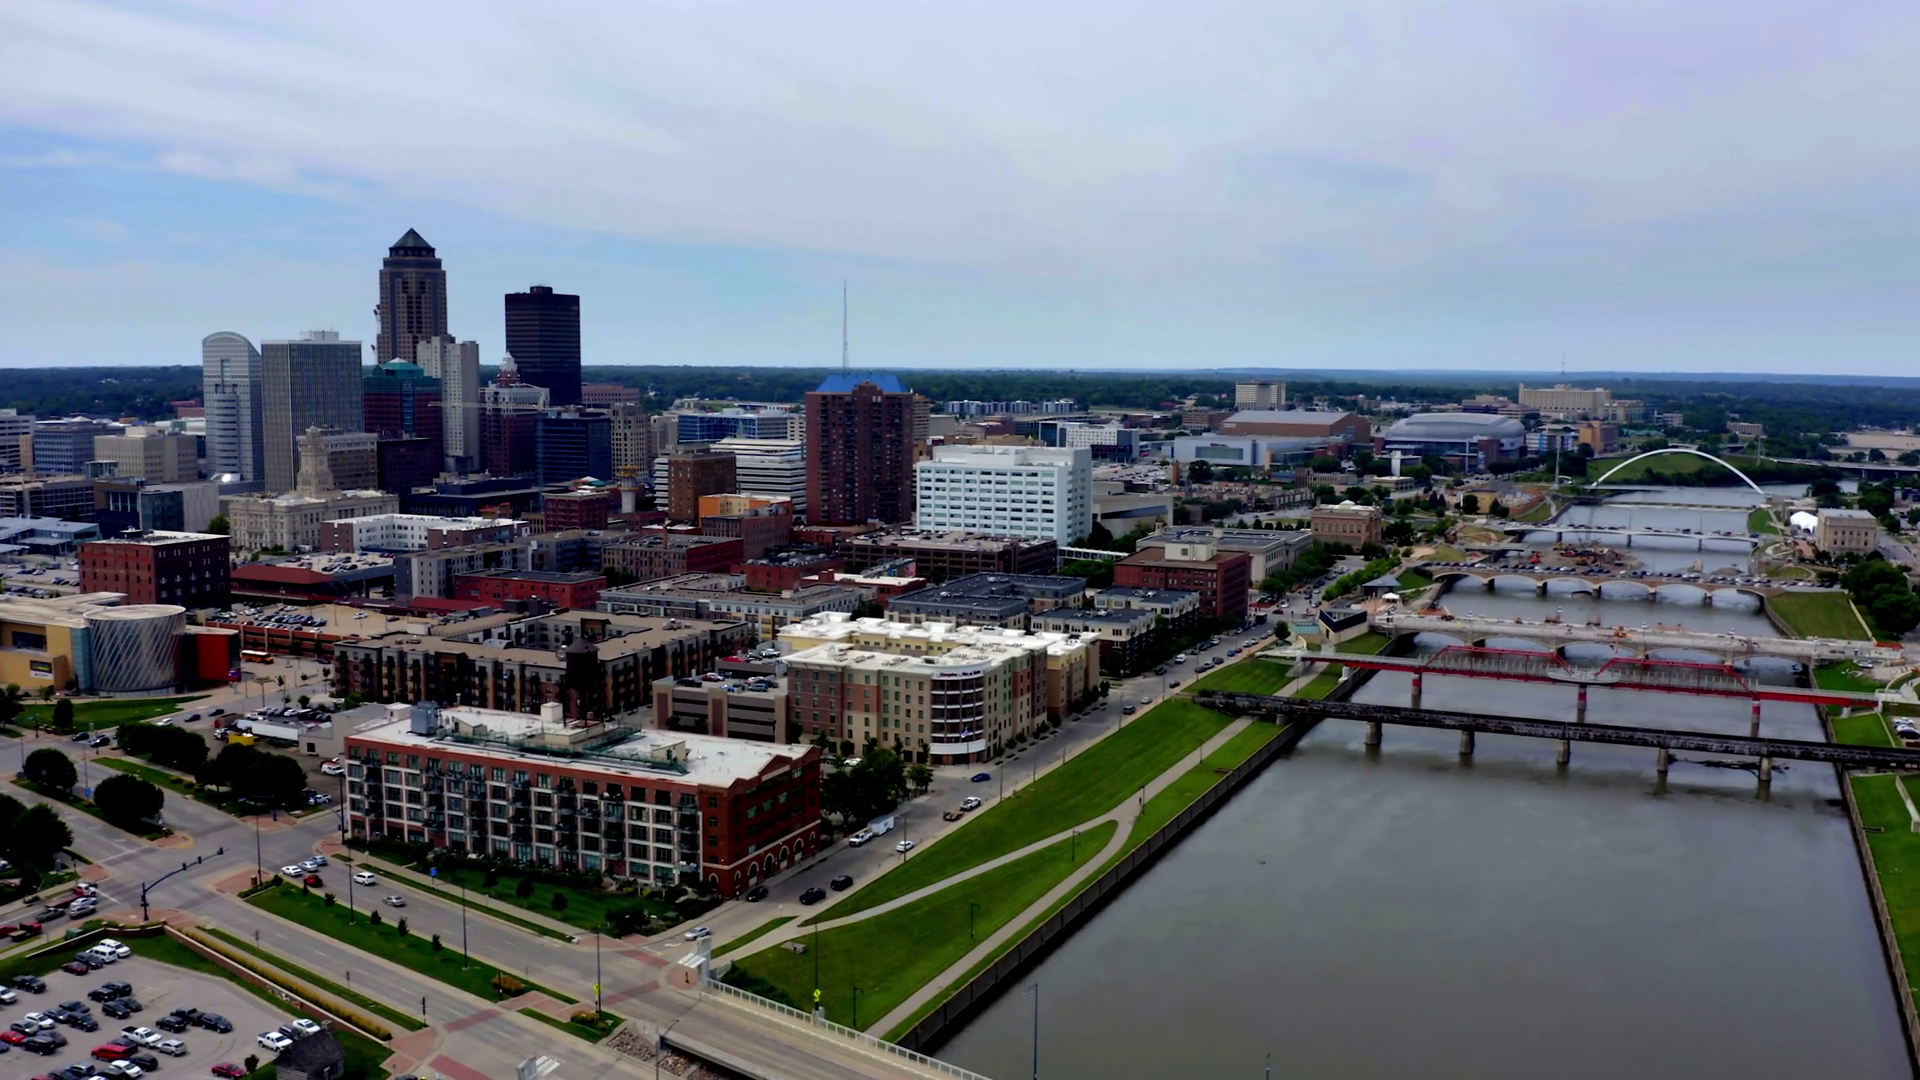 videoblocks-des-moines-iowa-city-skyline-skyscrapers-aerial-drone_rszzgmejus_thumbnail-1080_01.png